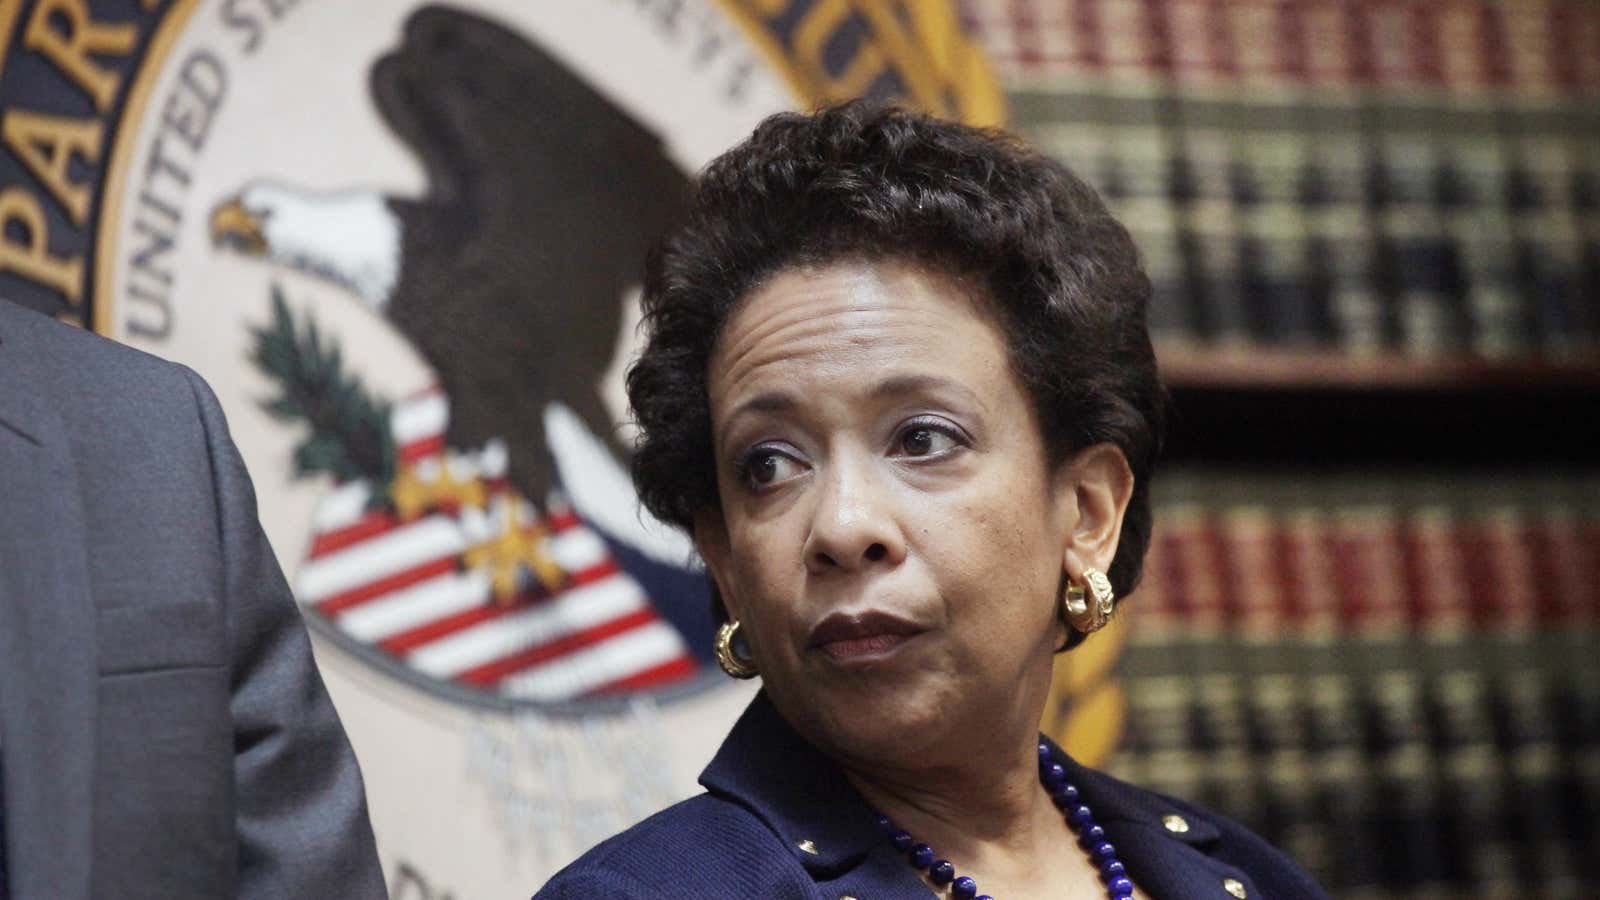 The most important player in world football: US attorney general Loretta Lynch.